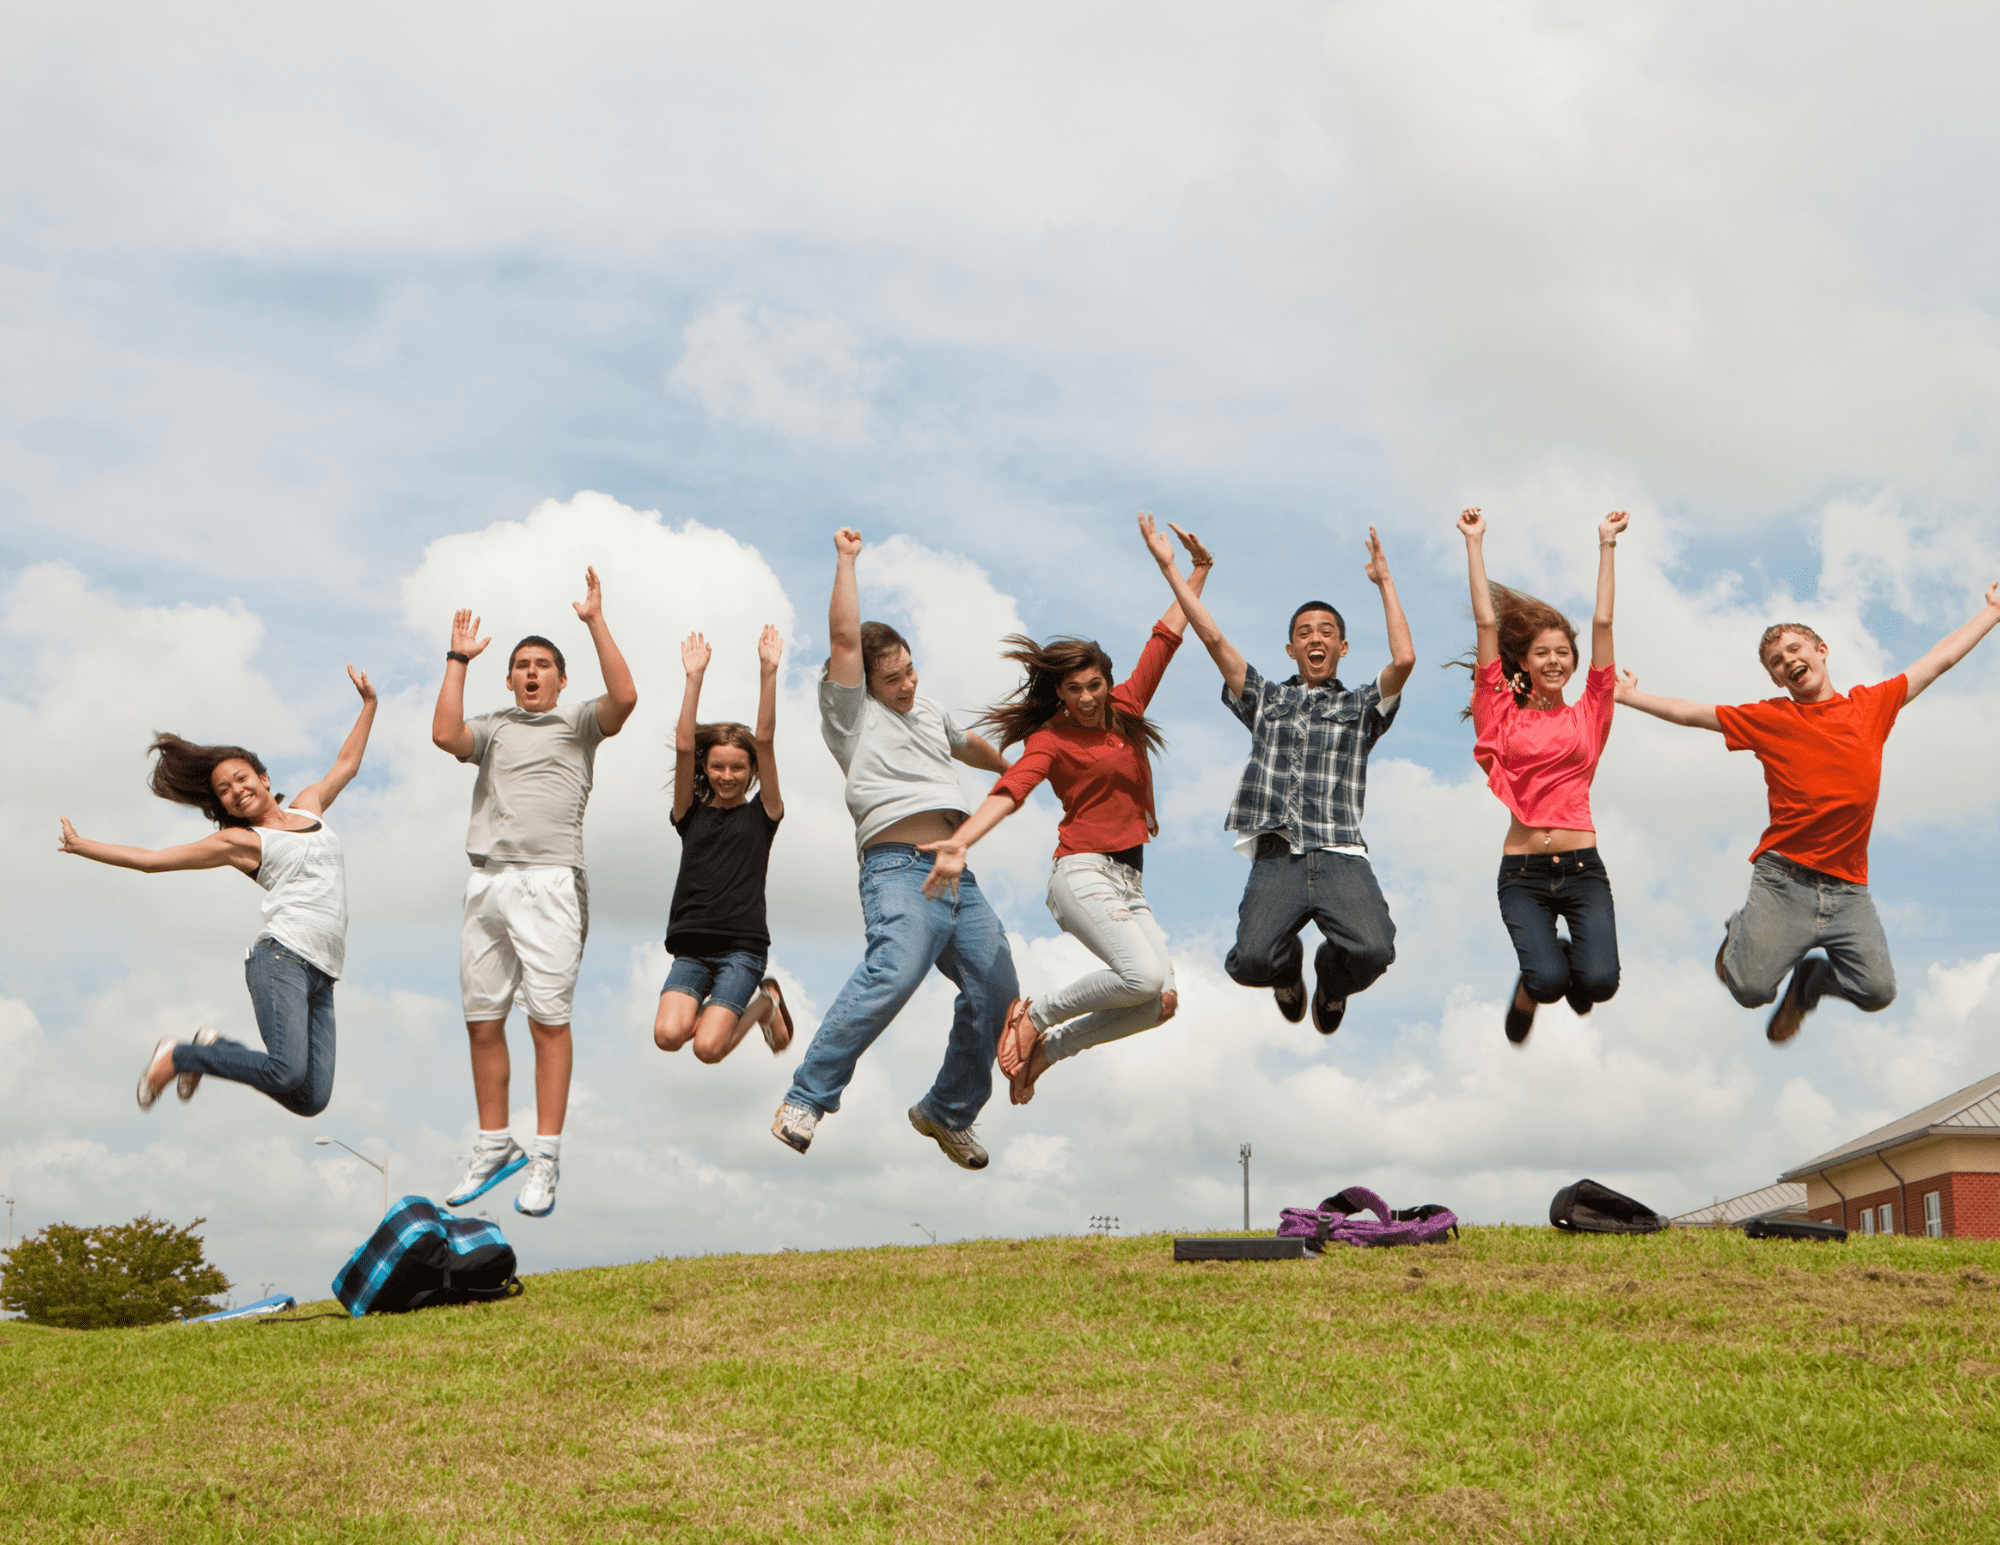 A lively group of eight young teenagers, leaping simultaneously in the air, arms to the sky, in a moment of shared joy.